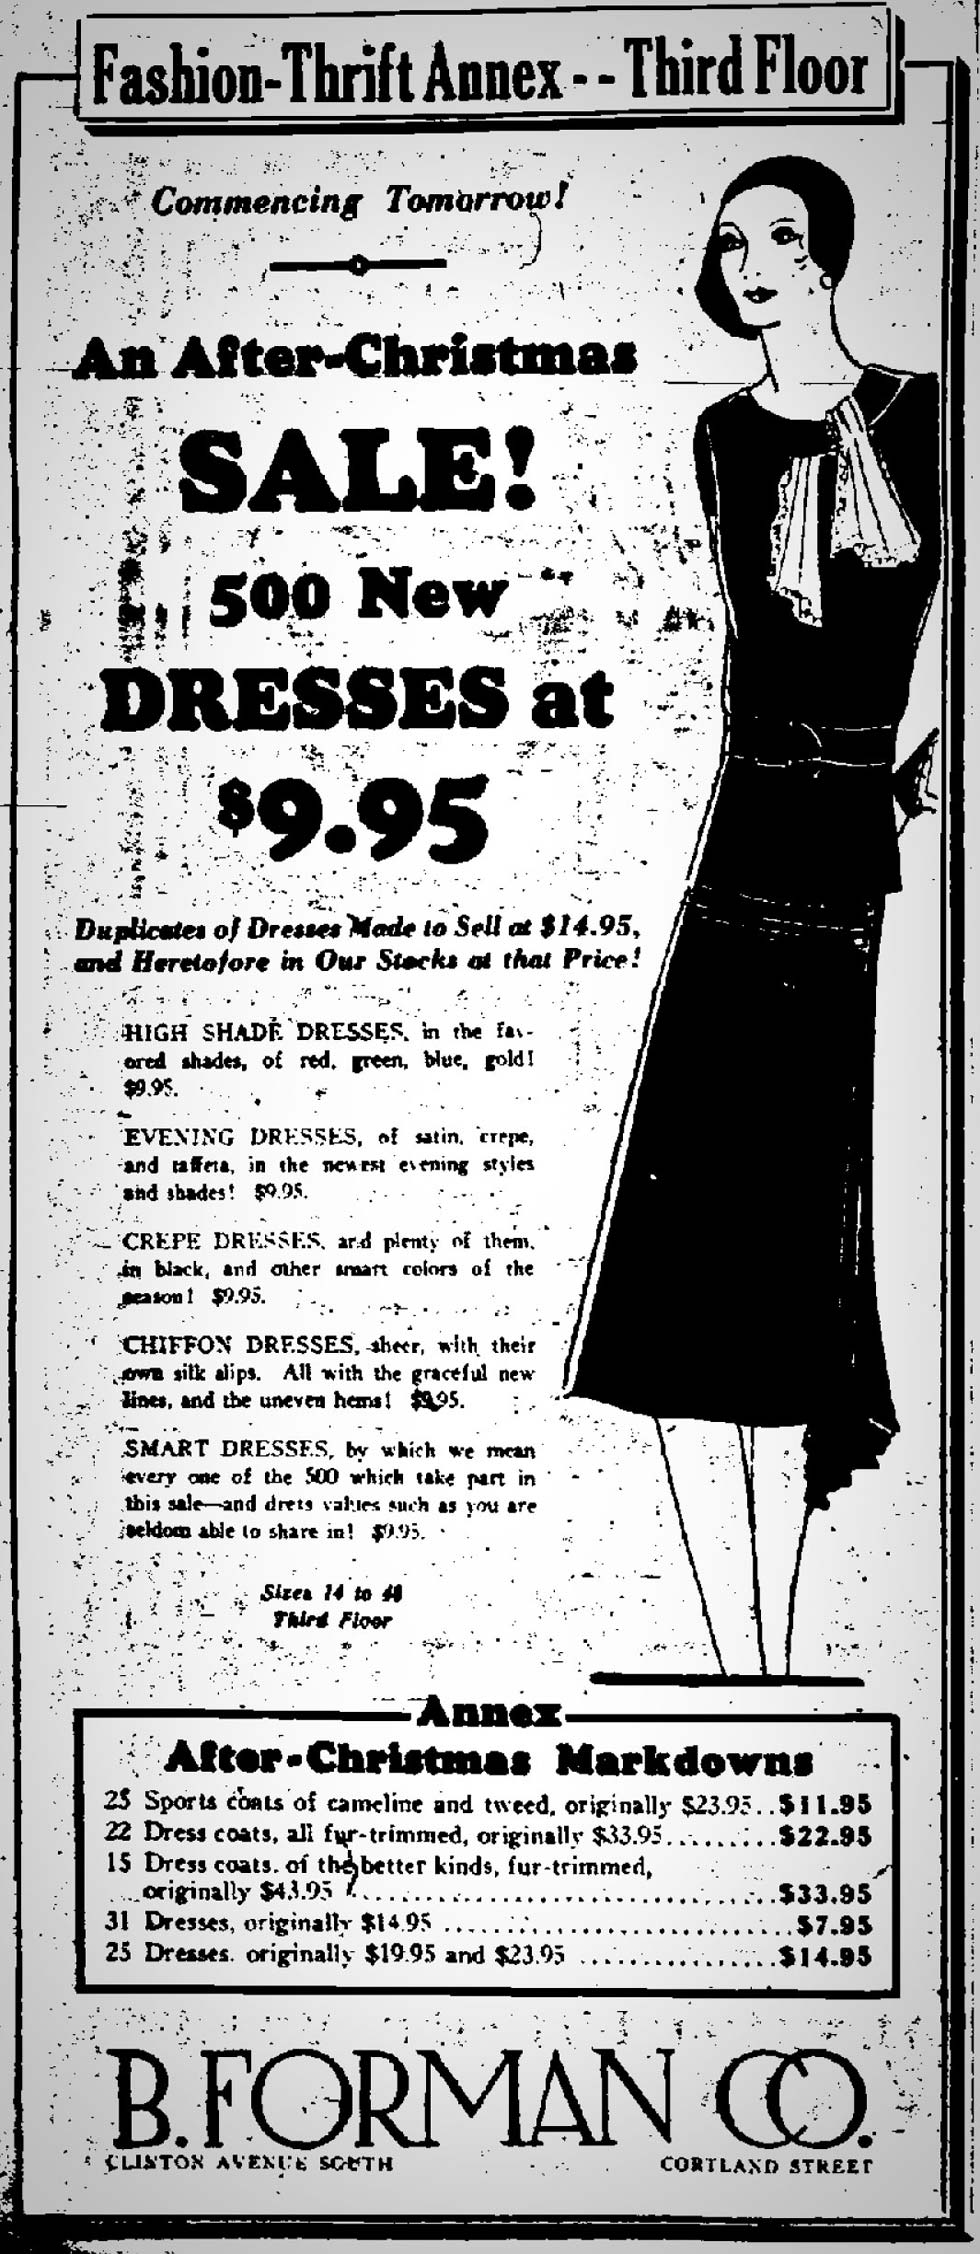 B. Forman Co. advertisment in the Democrat and Chronicle, December 25, 1929. [SOURCE: FultonHistory.com]